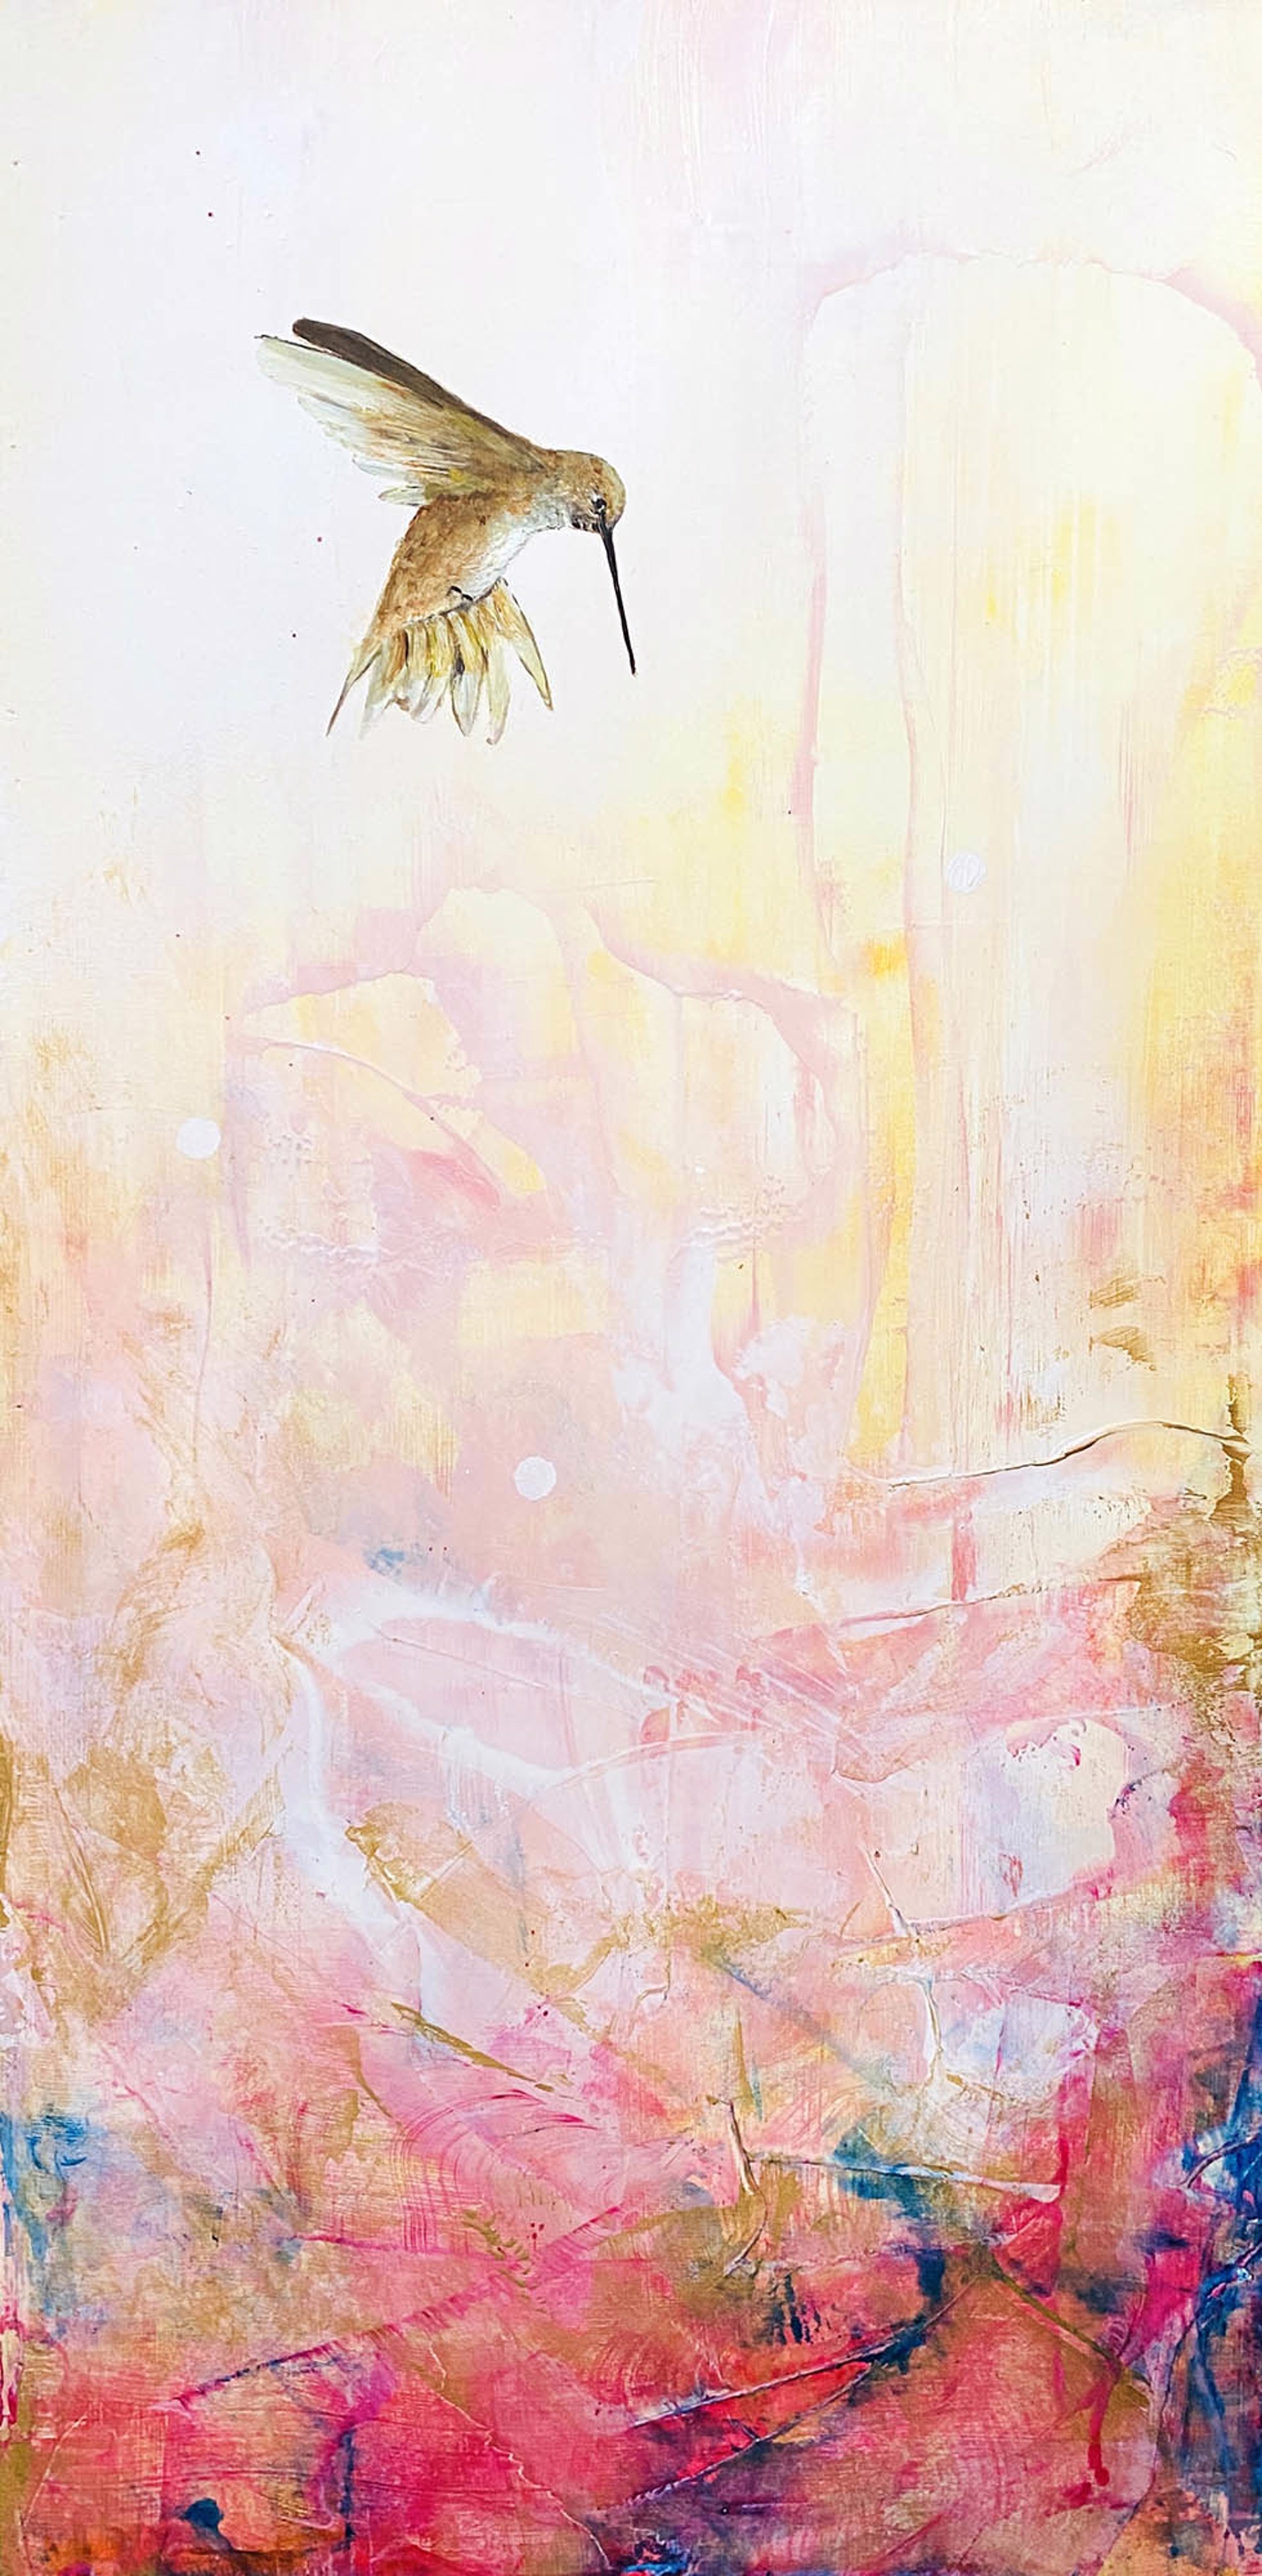 Original Oil Painting Featuring A Single Hummingbird Over Abstract Background In Yellow To Pink Gradient